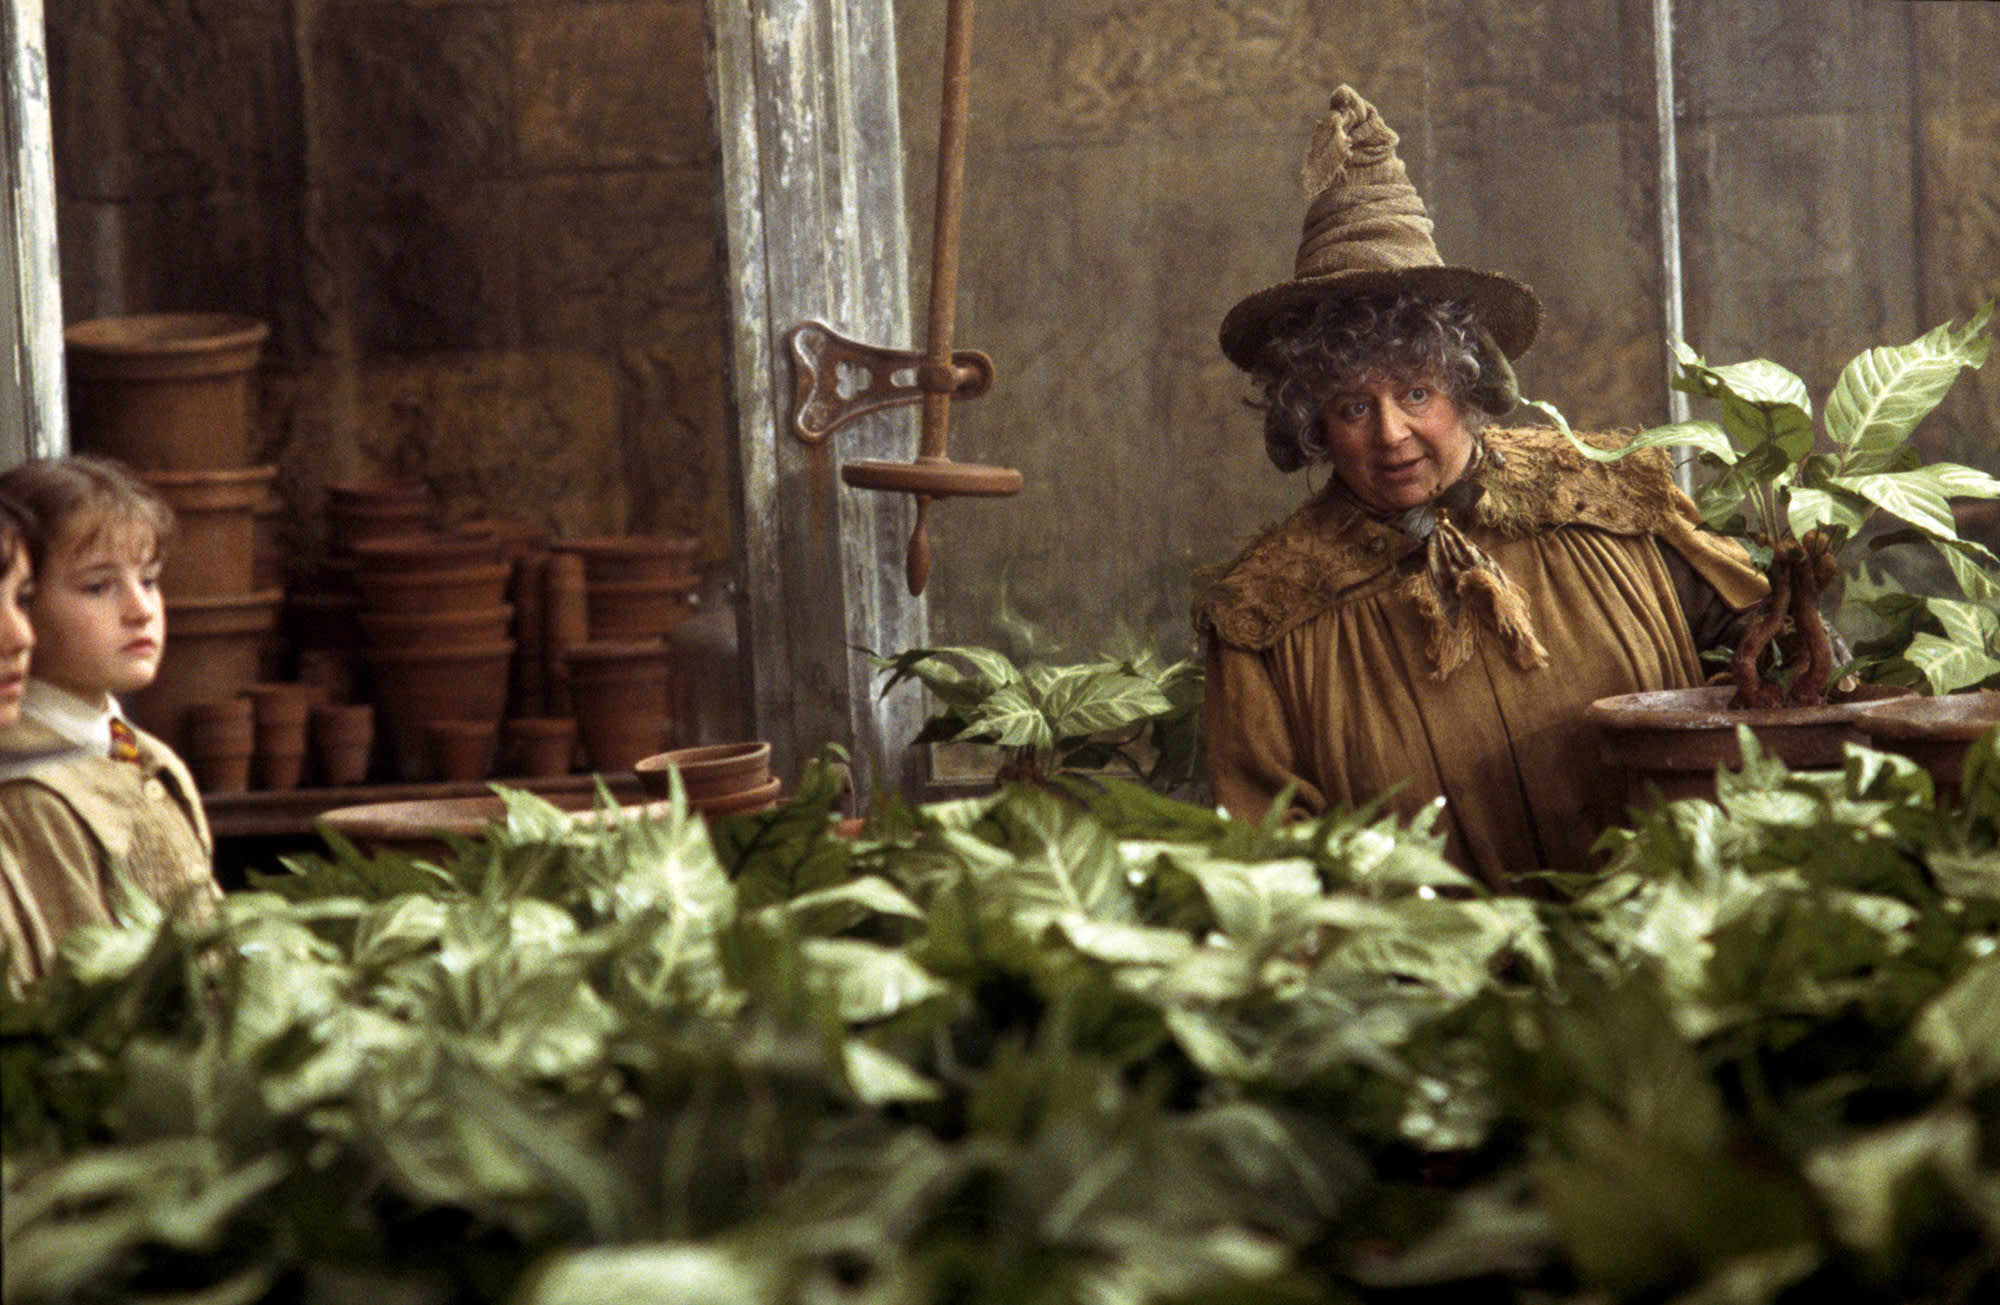 Professor Sprout teaching a Herbology lesson on Mandrakes.